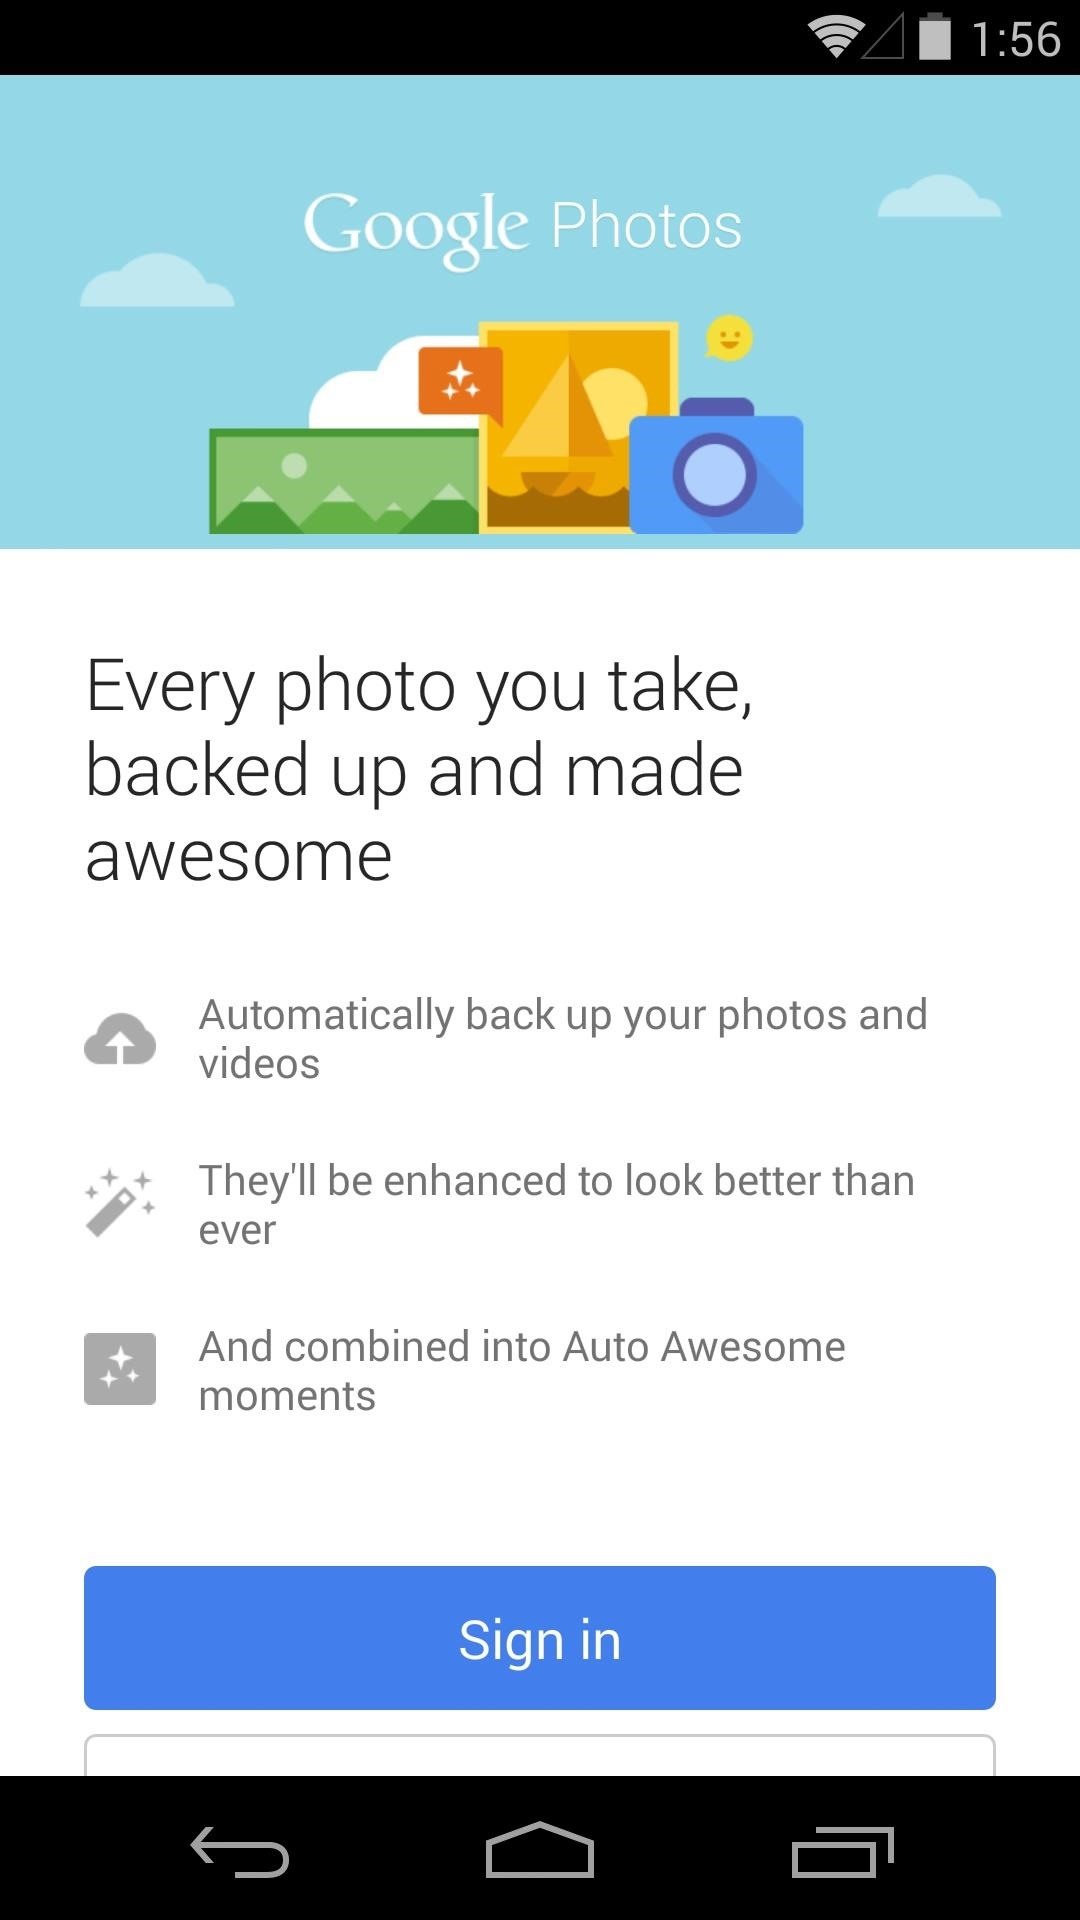 How to Free Up Storage Space on Android & Keep It from Getting Full